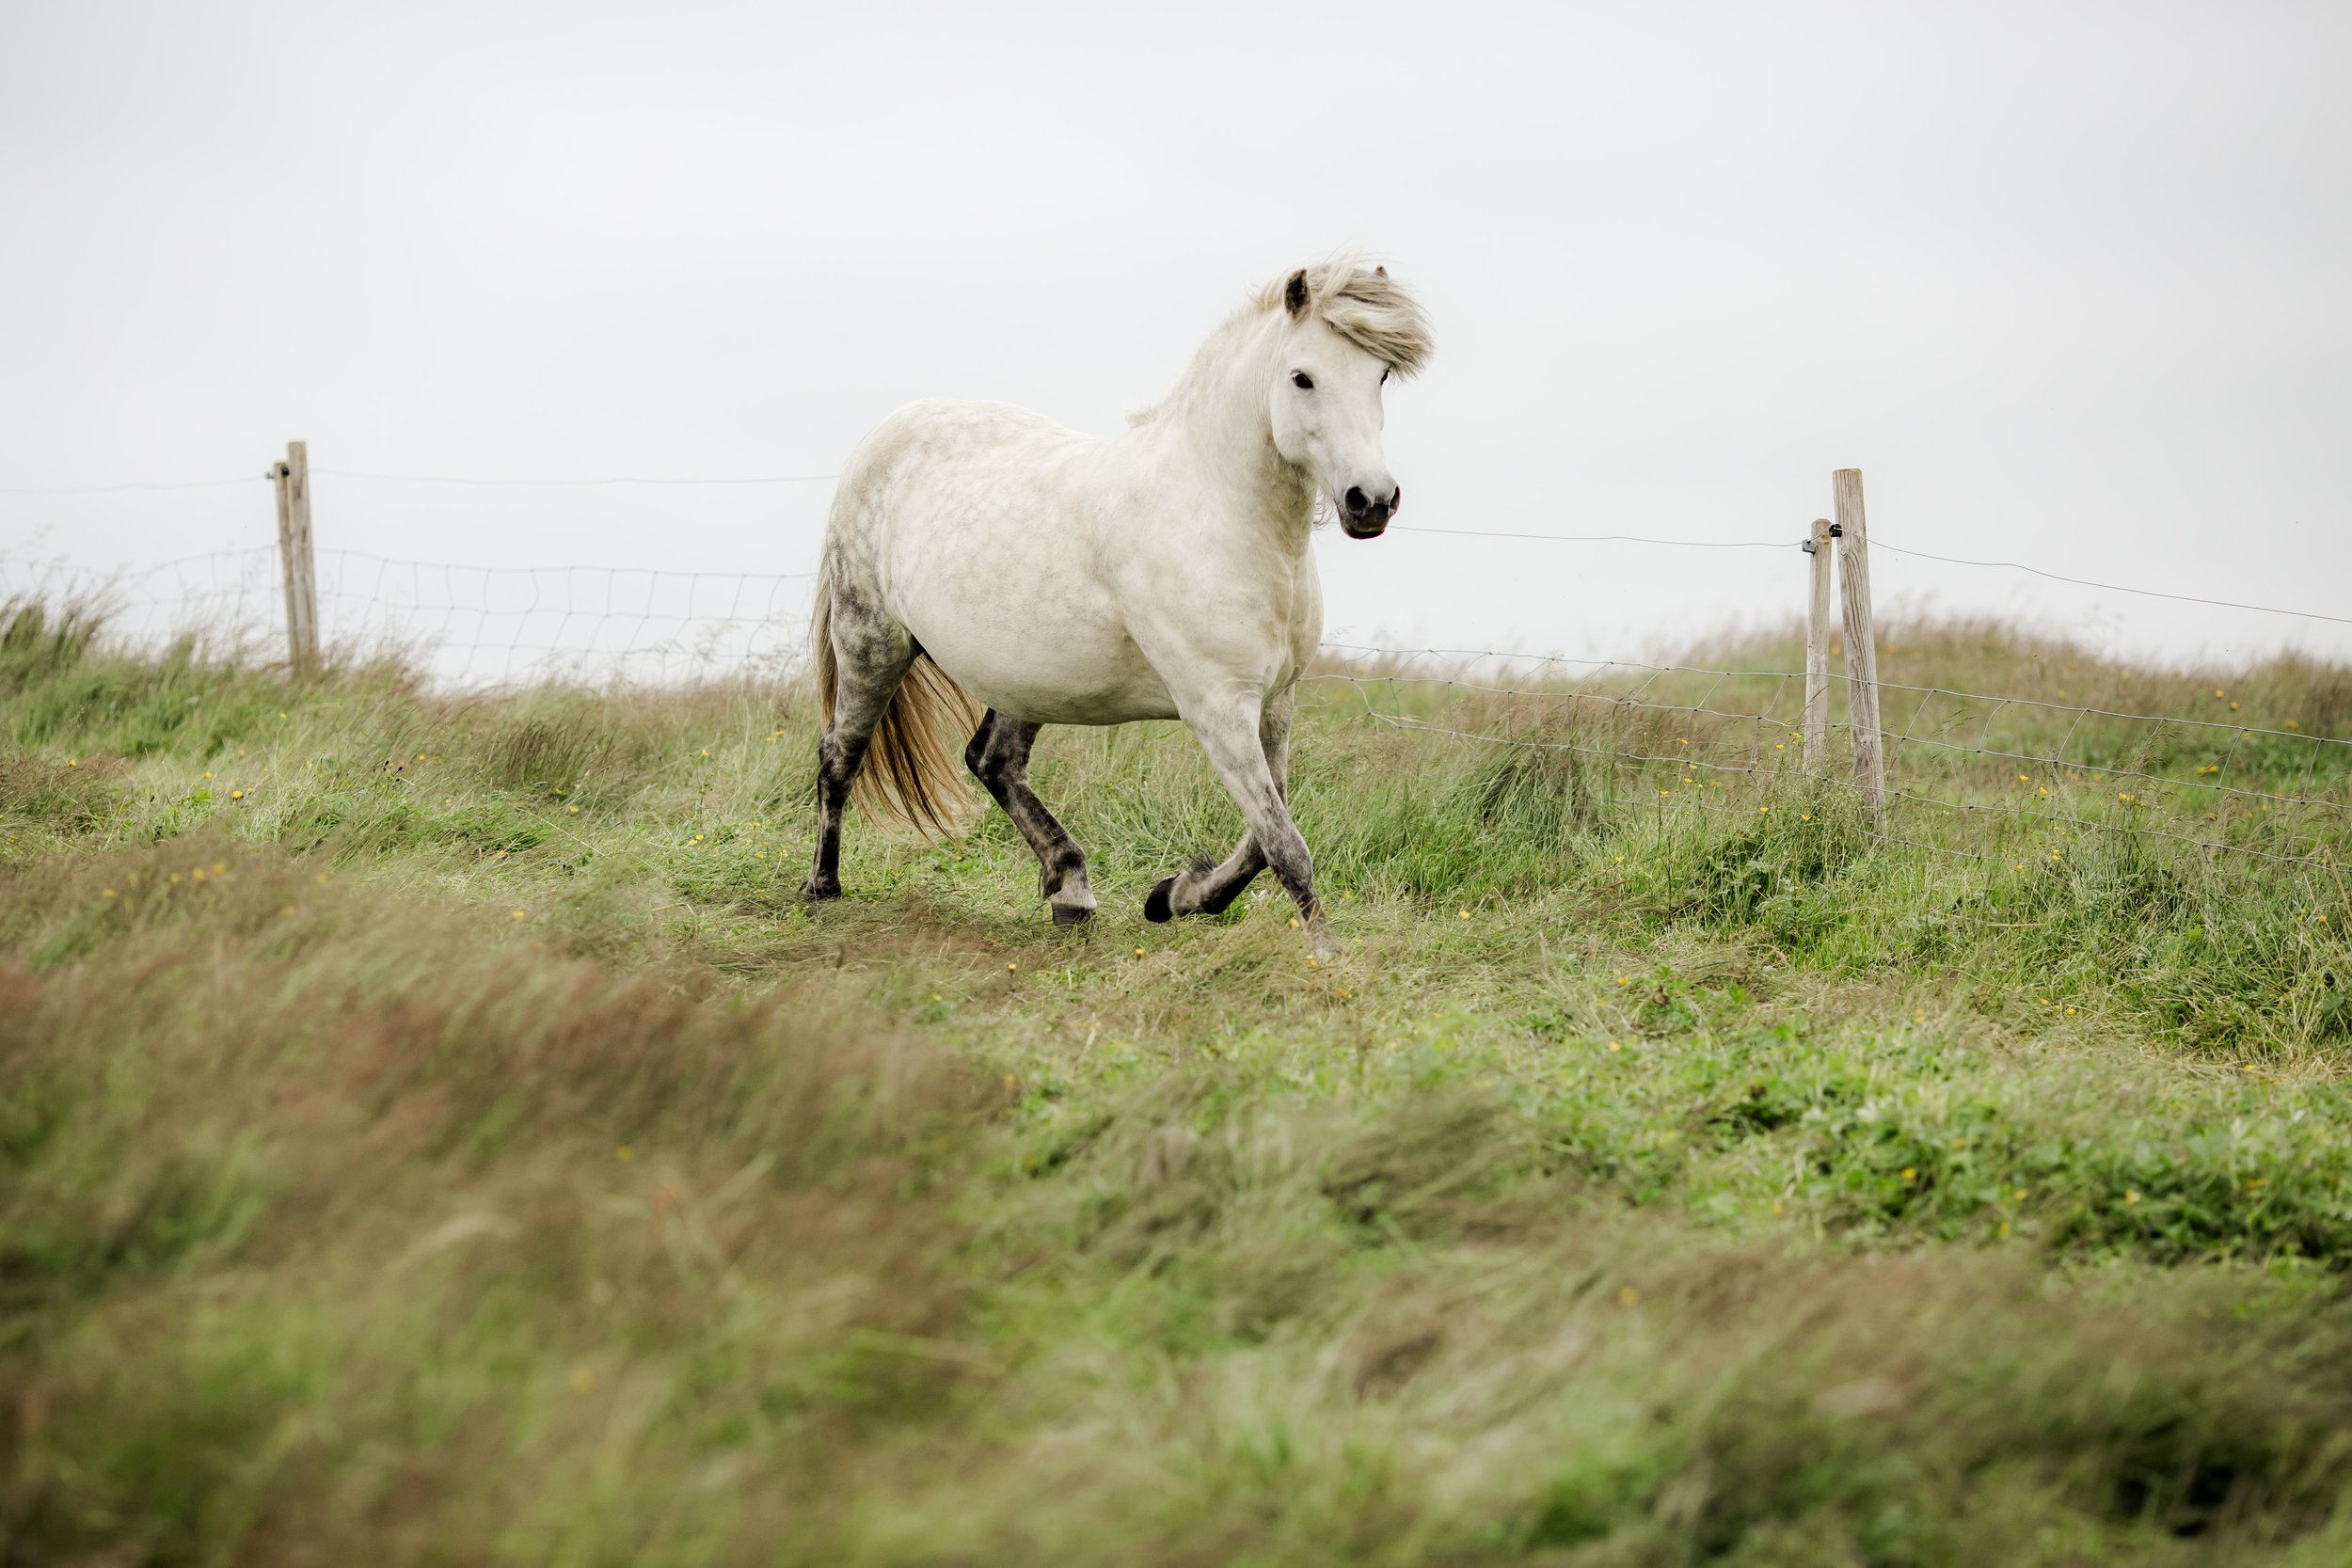 Horses in Iceland by Christina Swanson now on Cottage Hill26.jpg